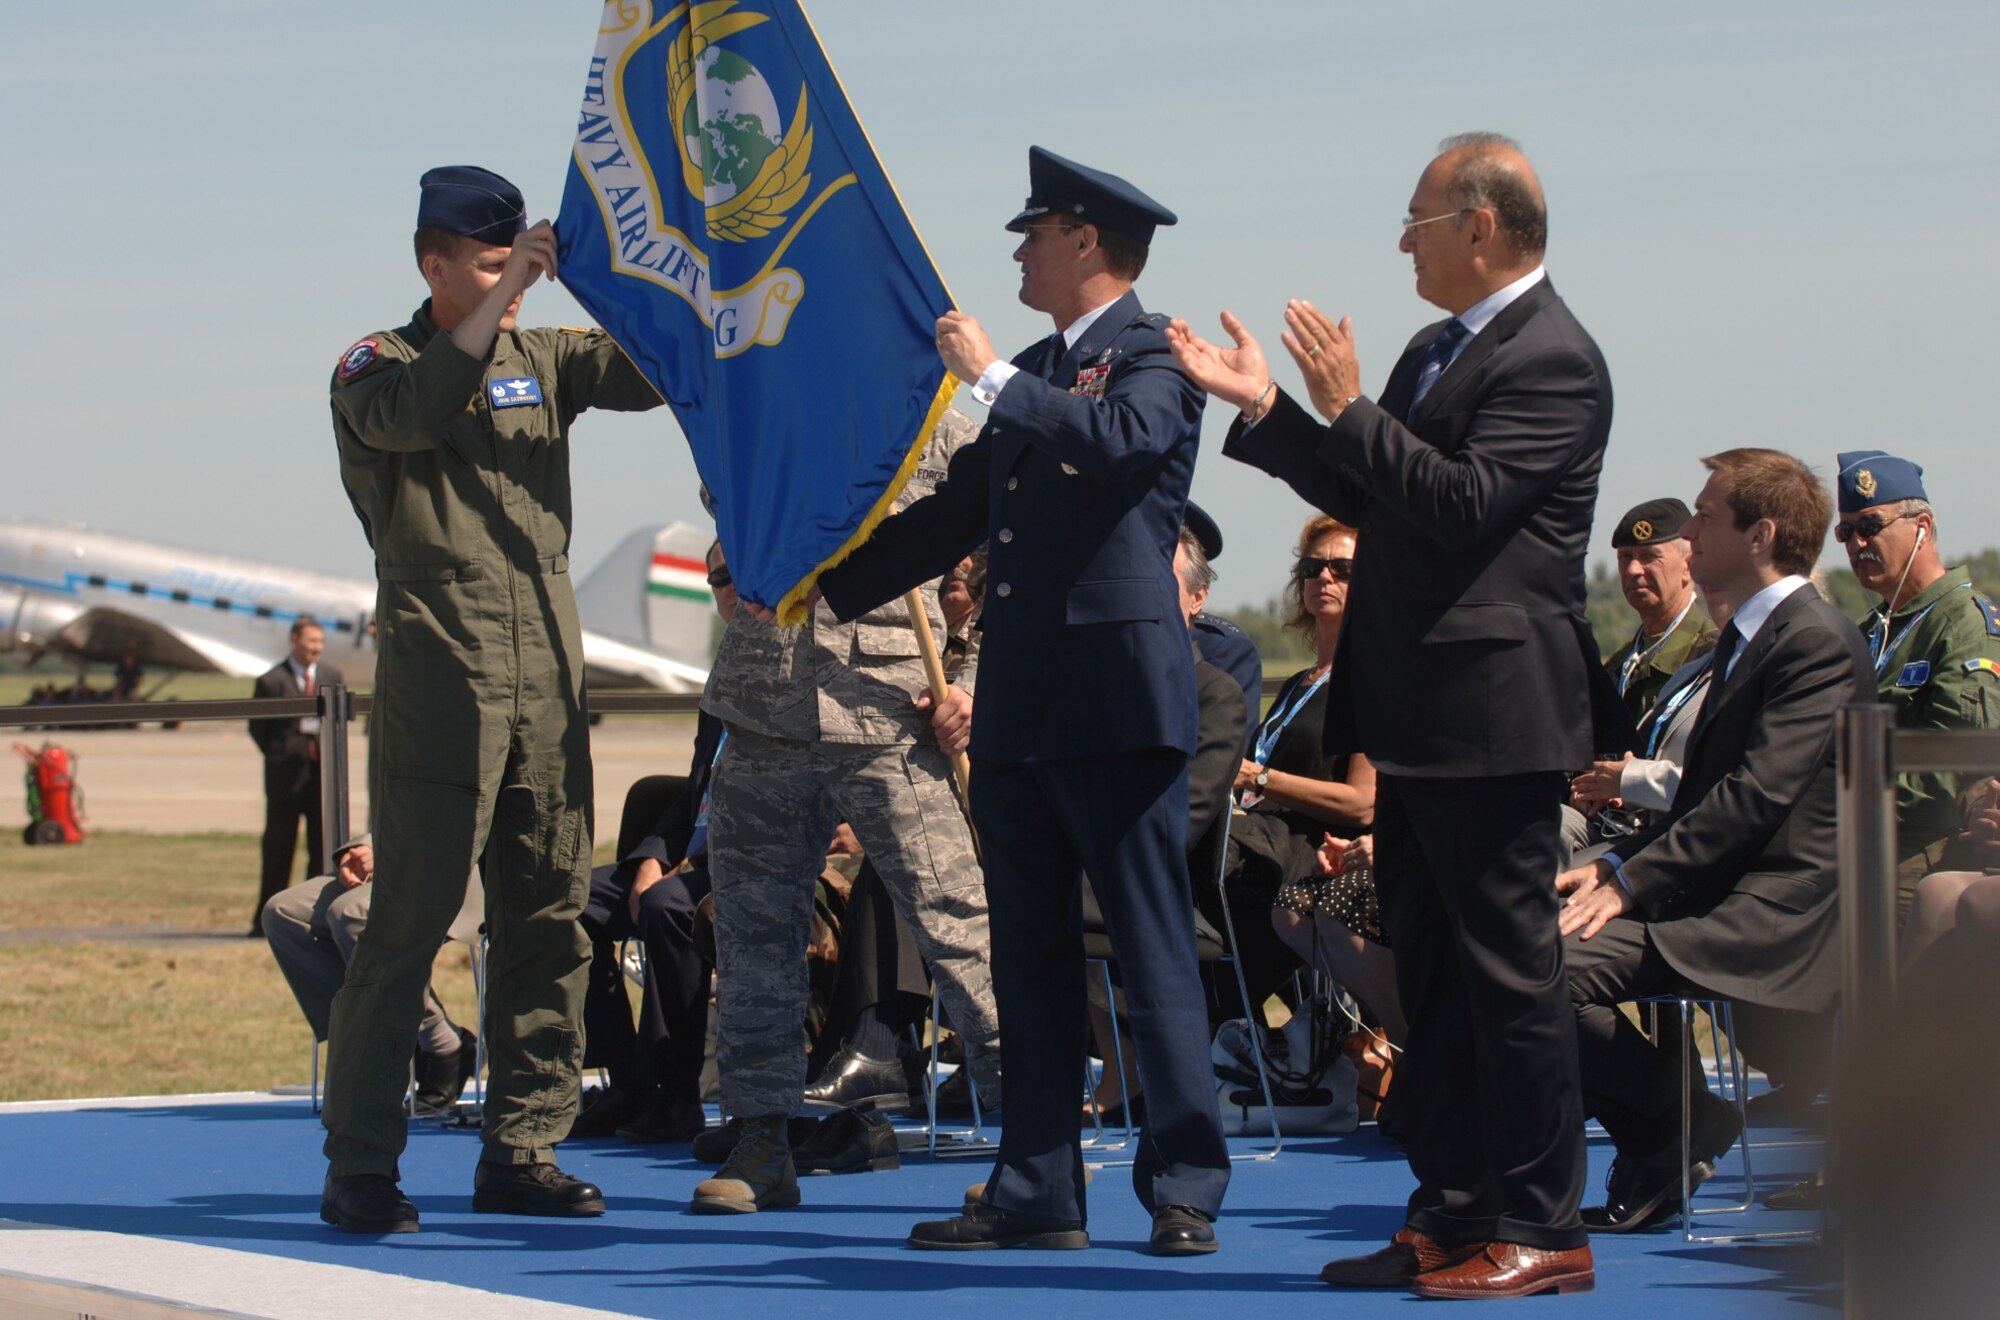 PAPA AIR BASE, Hungary--During the official activation ceremony of a first-of-its-kind multinational Heavy Airlift Wing at Papa Air Base, Hungary on Jul. 27, U.S. Air Force Col. John Zazworsky and Brig. Gen. Richard Johnston unveil the organizational flag.  The ceremony celebrated the efforts of the 12 nations who, over the last 10 months, stood up the organization that will provide strategic airlift worldwide for humanitarian, disaster relief, and peacekeeping missions in support of the European Union, United Nations and NATO. (Depart of Defense photo/Master Sgt. Scott Wagers